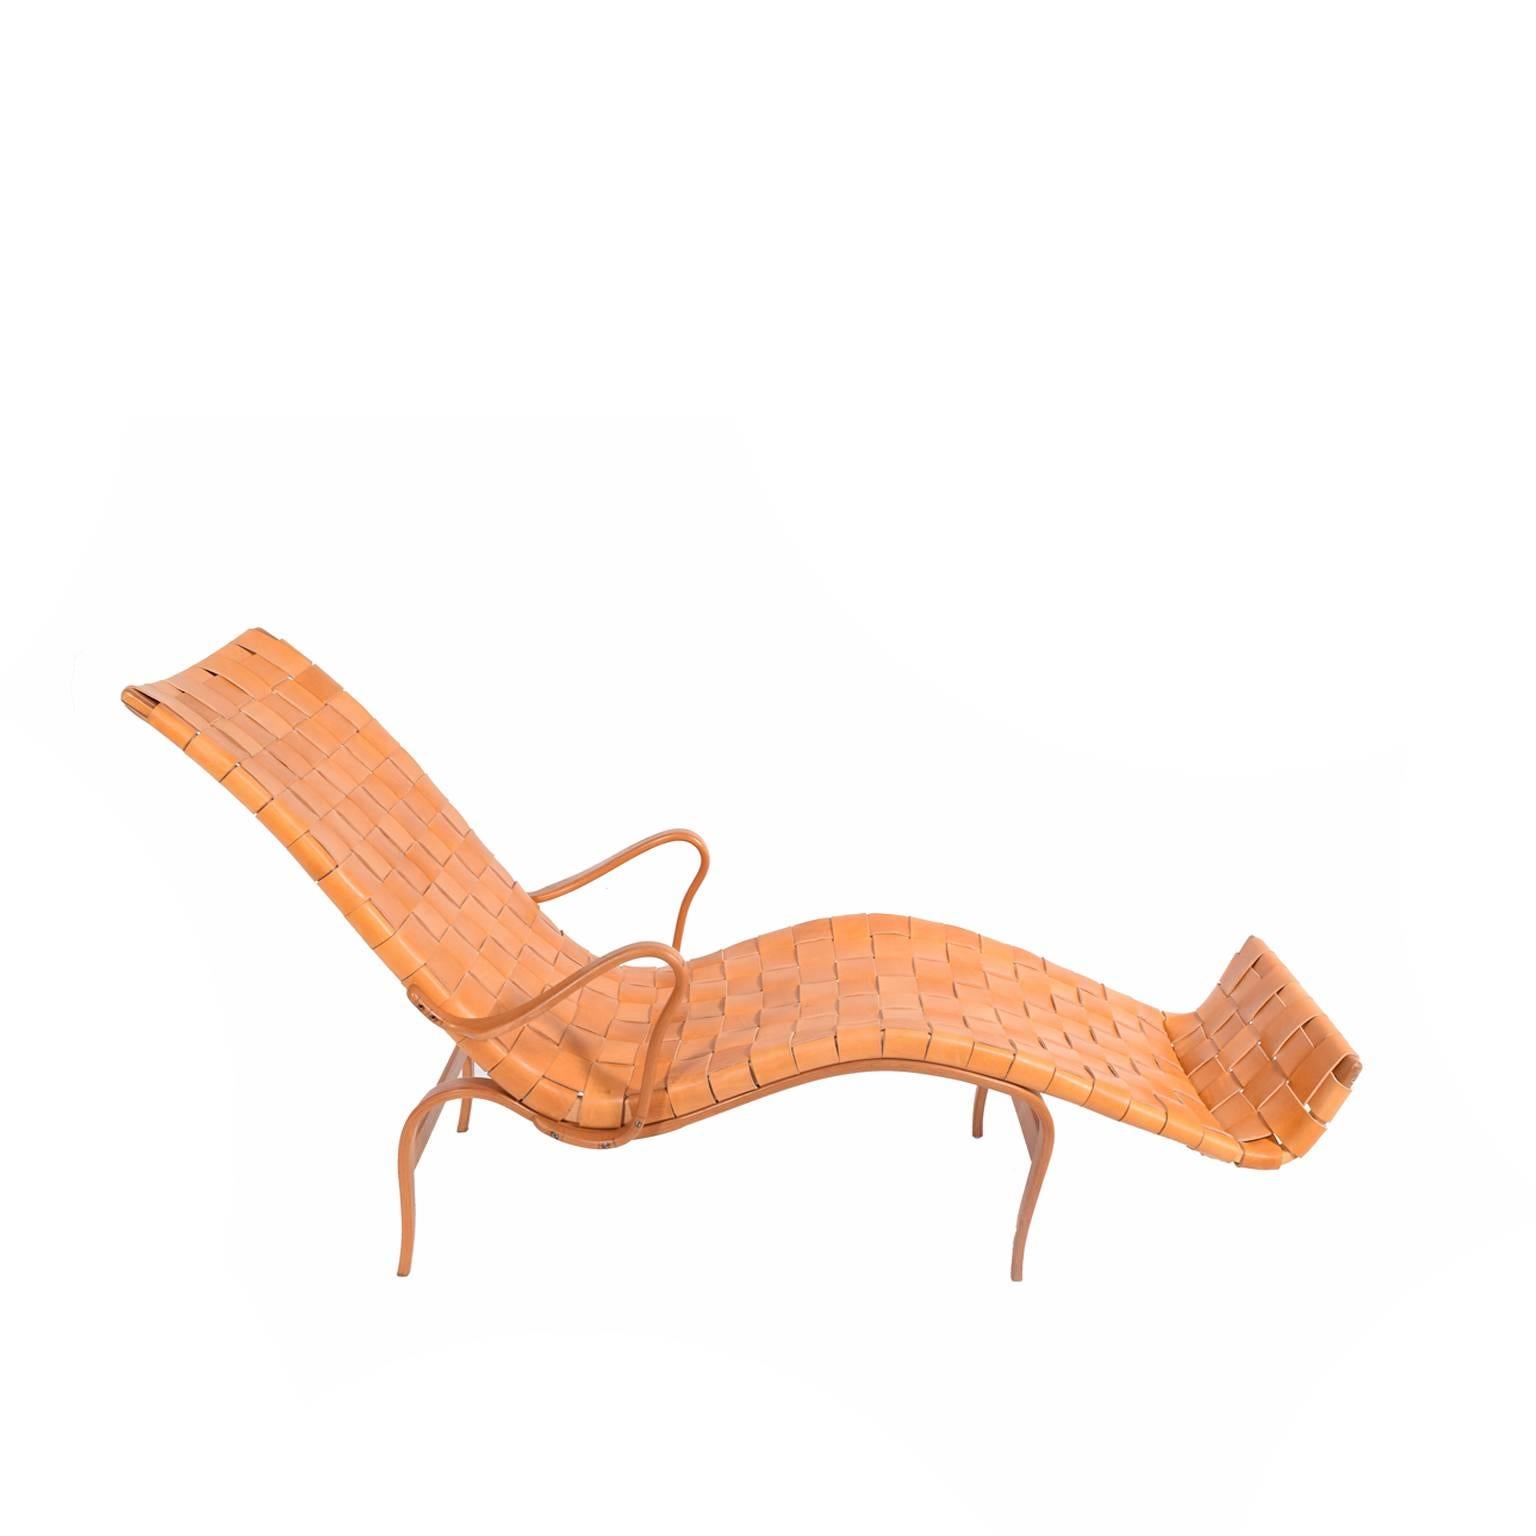 Signed, early Bruno Mathsson 'Pernila Three' chaise longue with frame of laminated beechwood and leather straps made by Karl Mathsson. Newer straps.